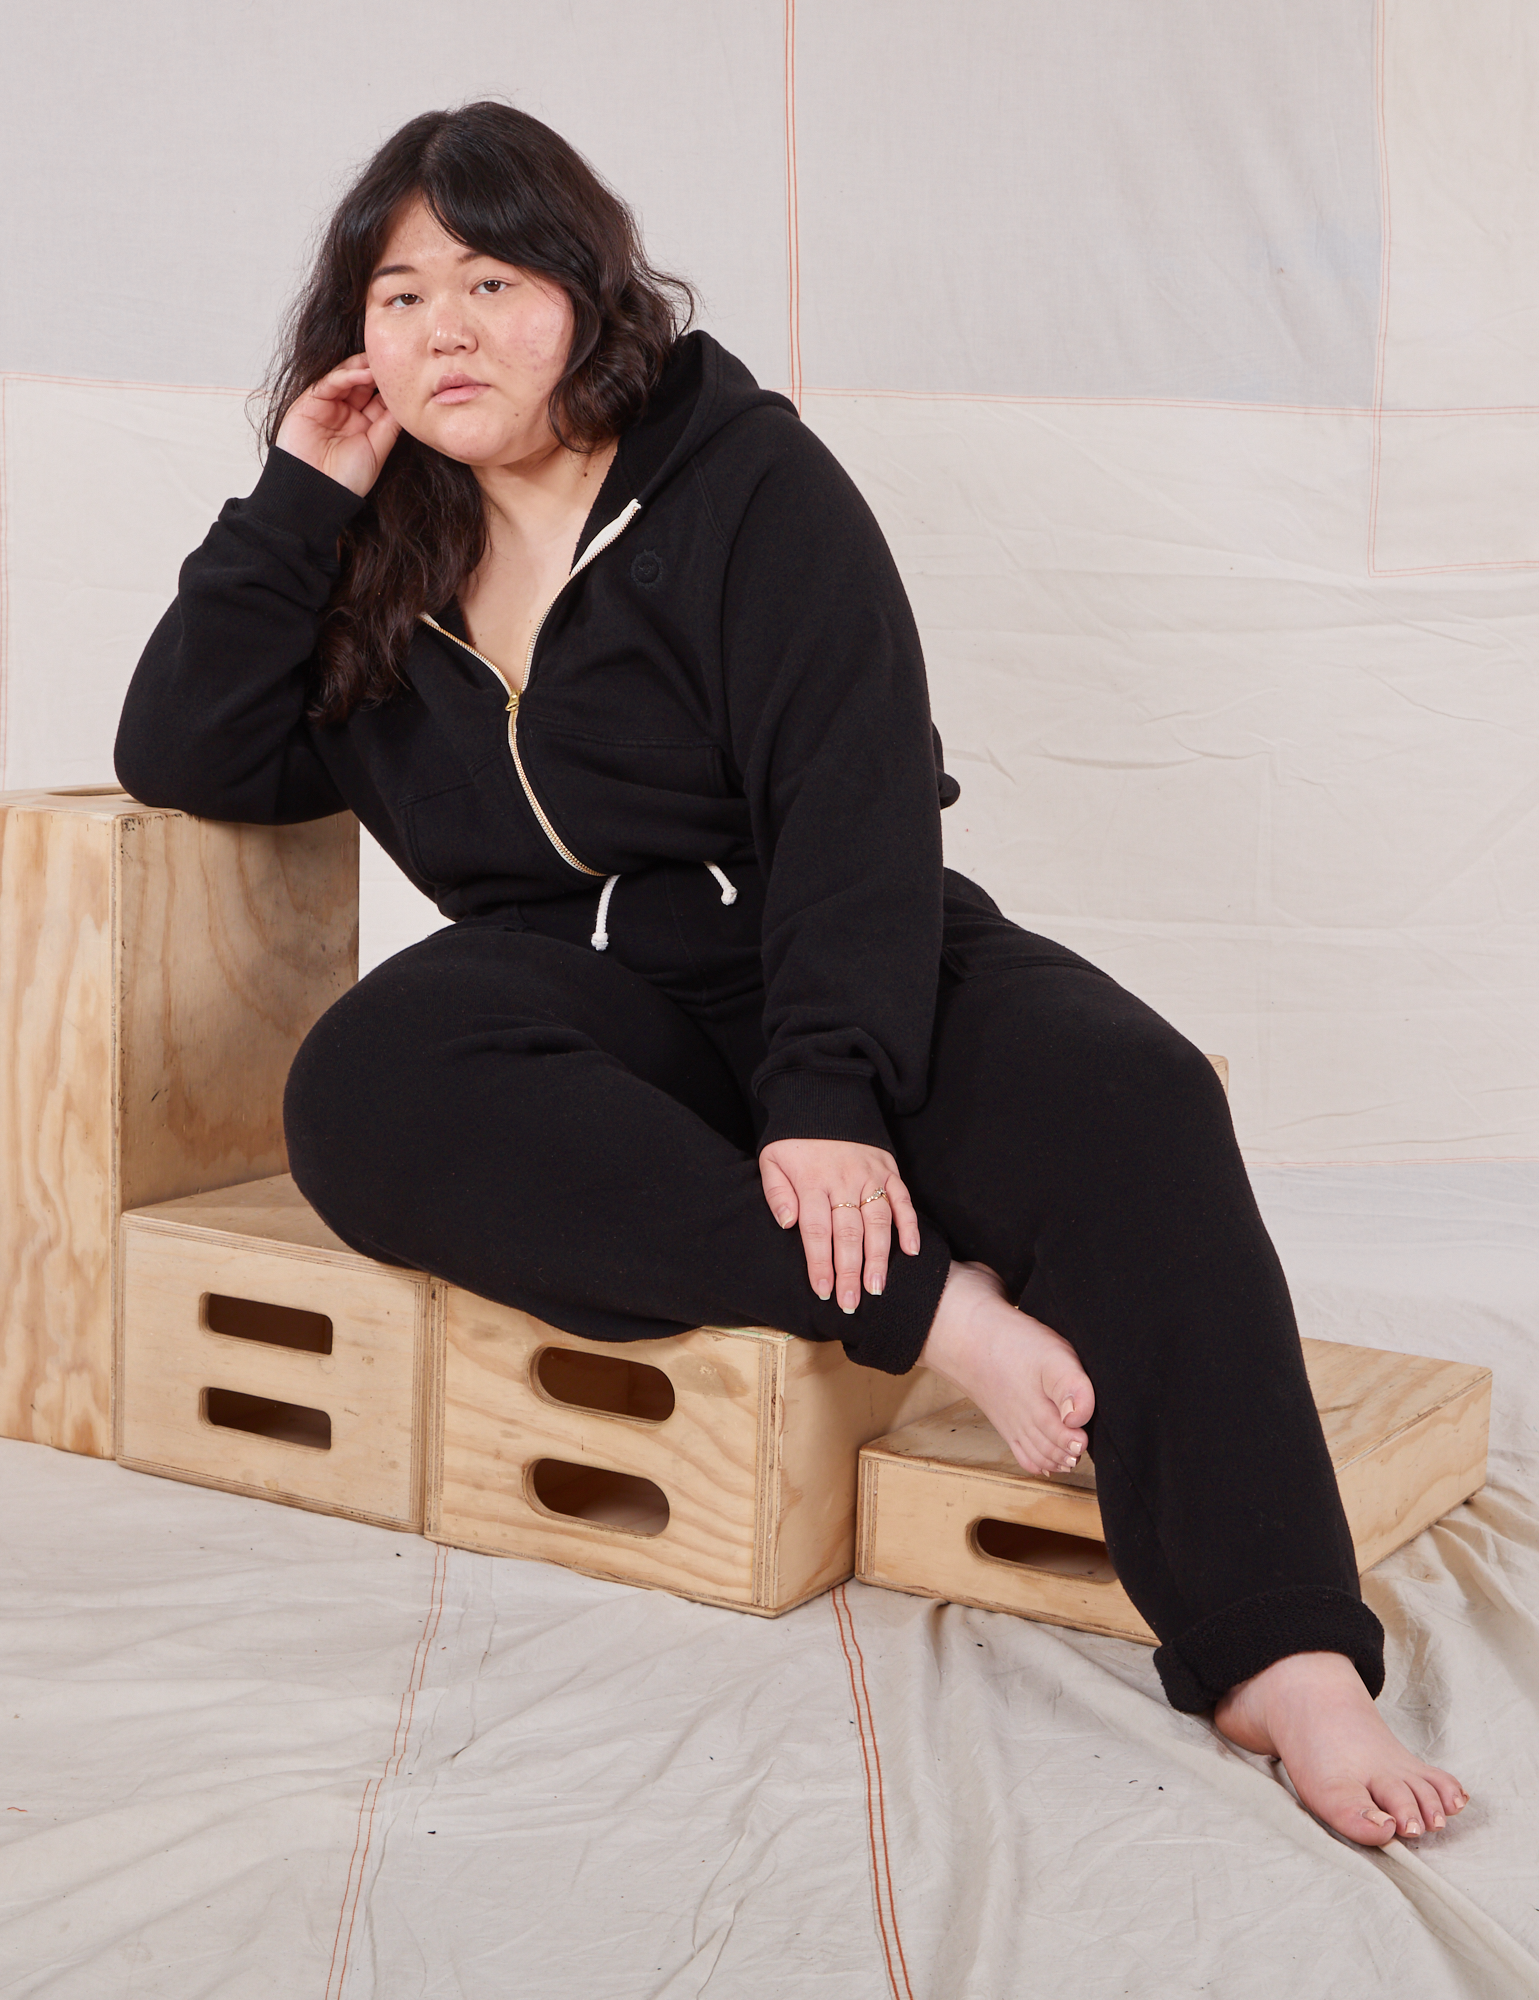 Ashley is wearing Rolled Cuff Sweat Pants in Basic Black and matching Cropped Zip Hoodie